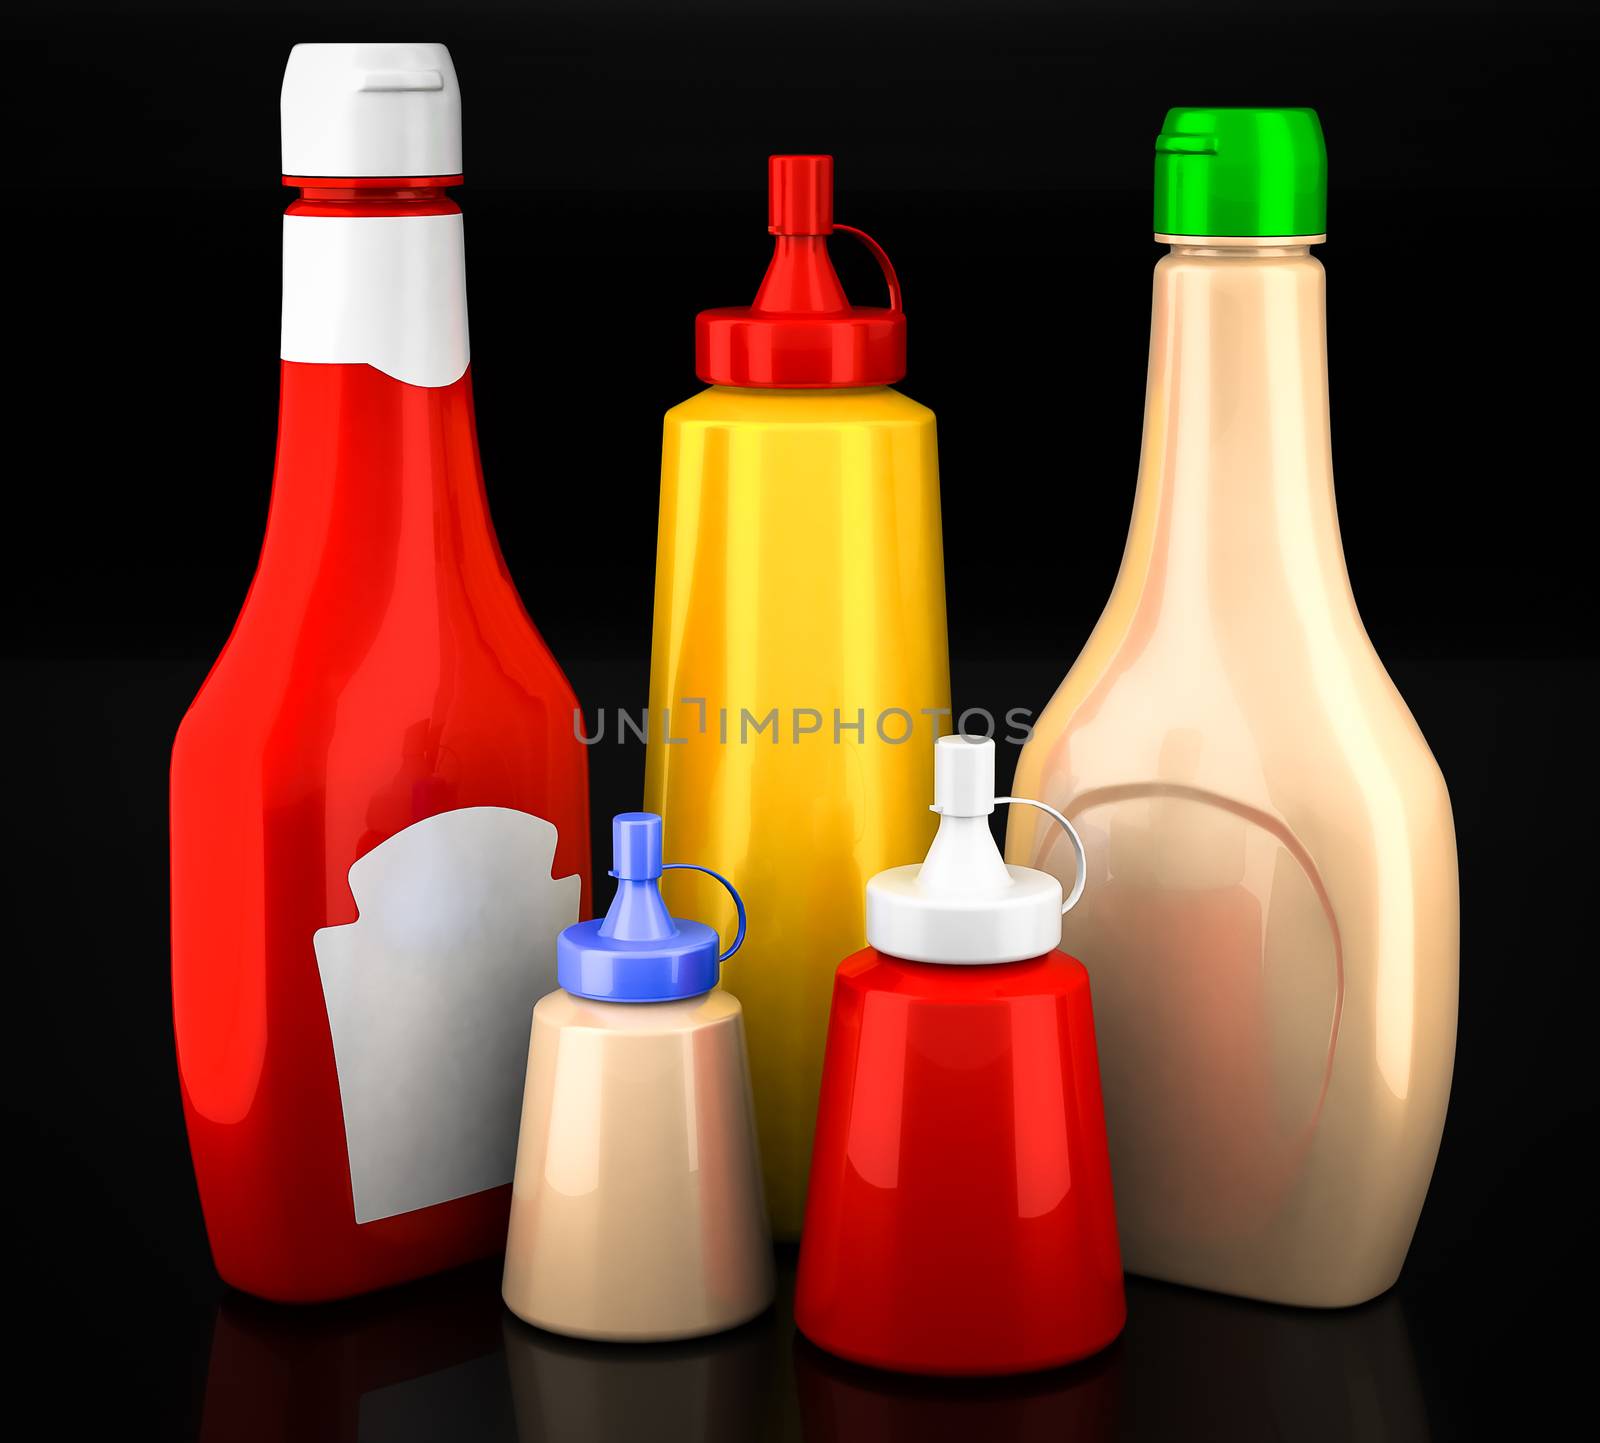 Bottles of ketchup, mustard and mayonnaise by mrgarry